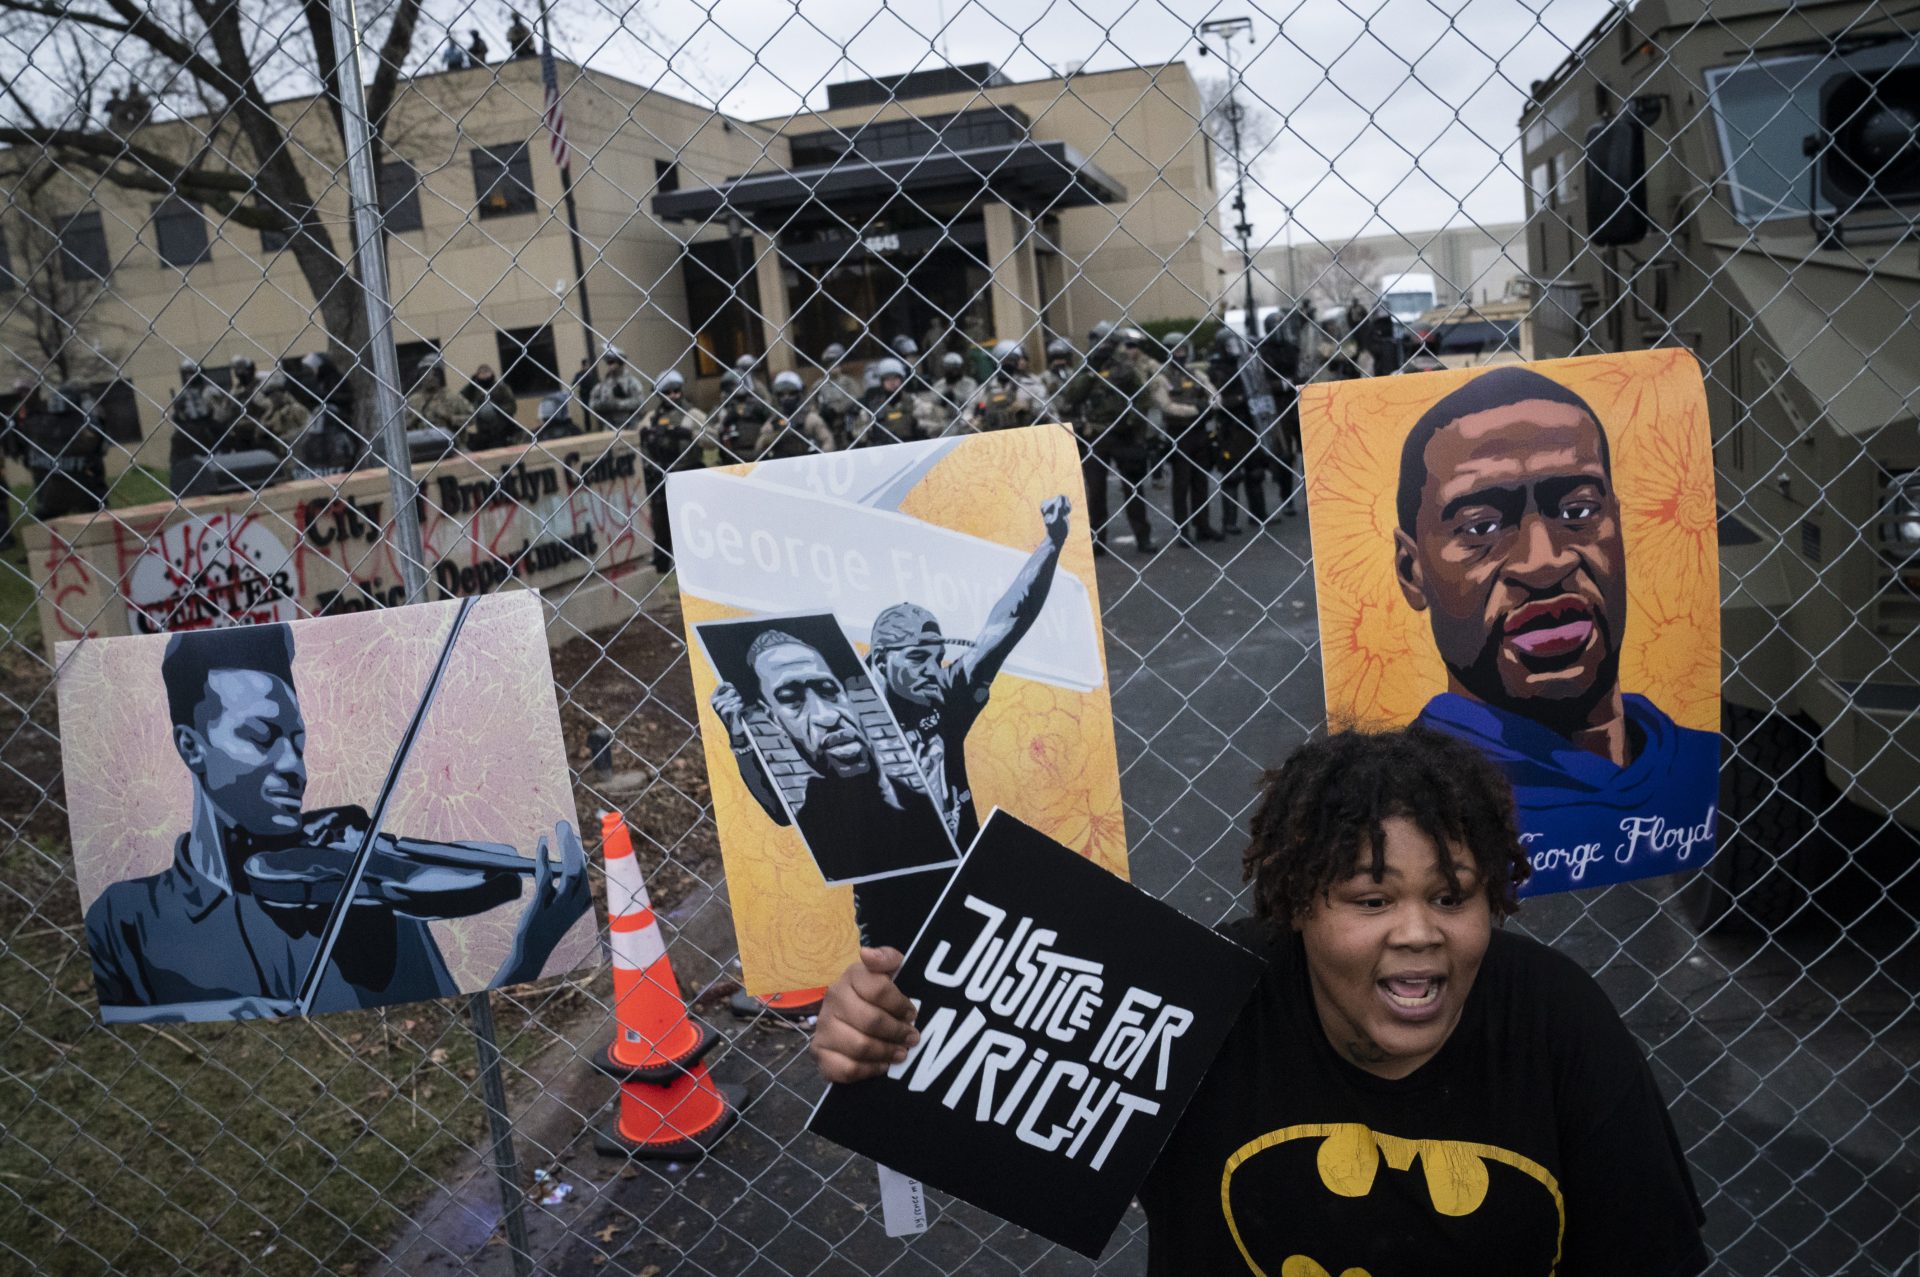 A demonstrator holds a sign along a perimeter fence guarded by law enforcement officers during a protest over Sunday's fatal shooting of Daunte Wright during a traffic stop, outside the Brooklyn Center Police Department, Wednesday, April 14, 2021, in Brooklyn Center, Minn. At right on the fence is an image of George Floyd.